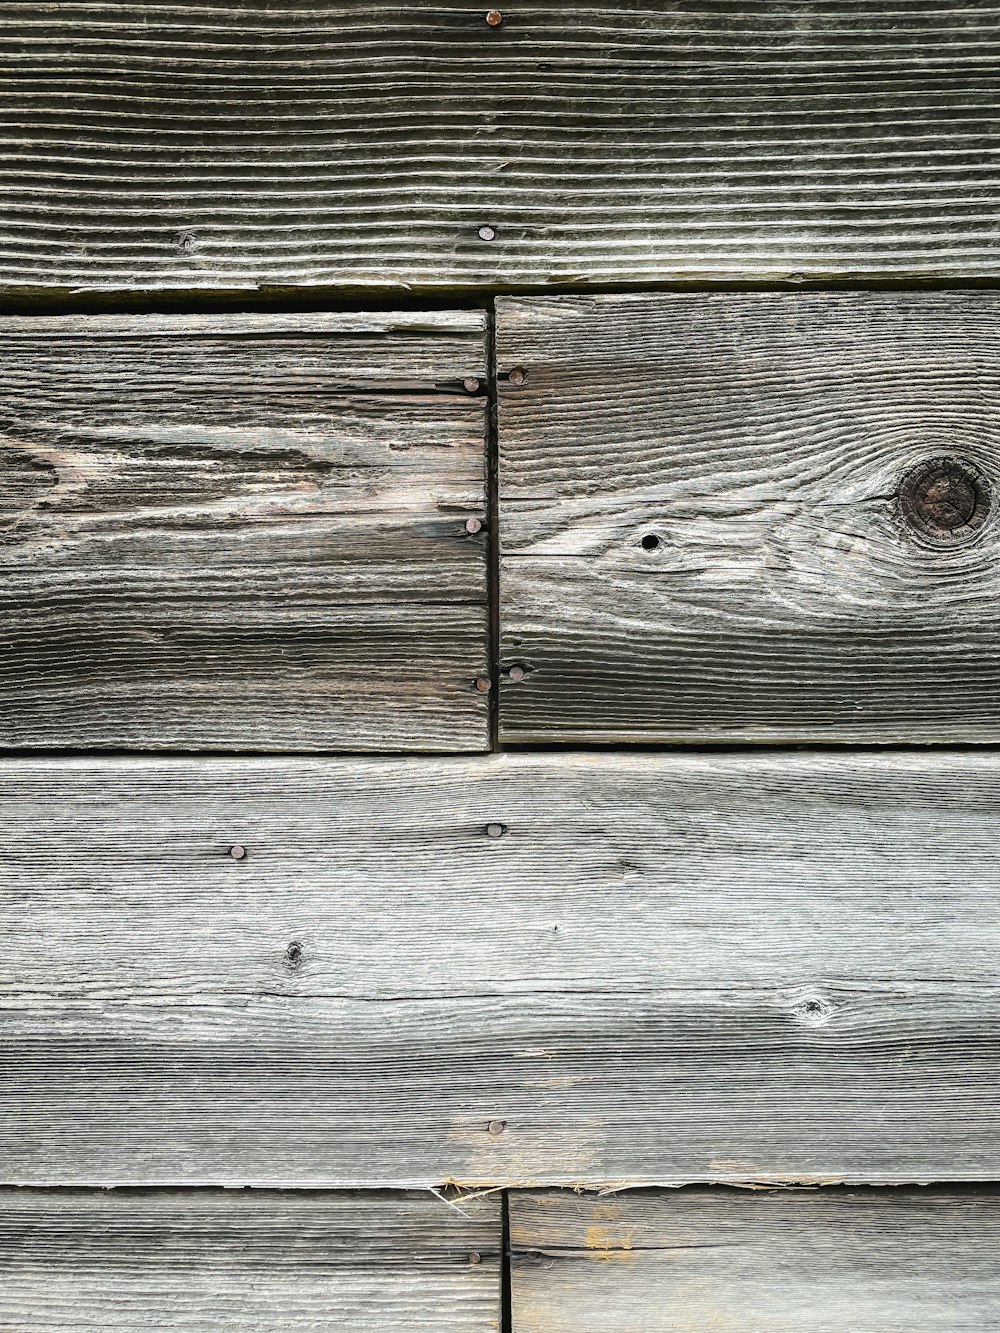 a wooden surface with a hole in it